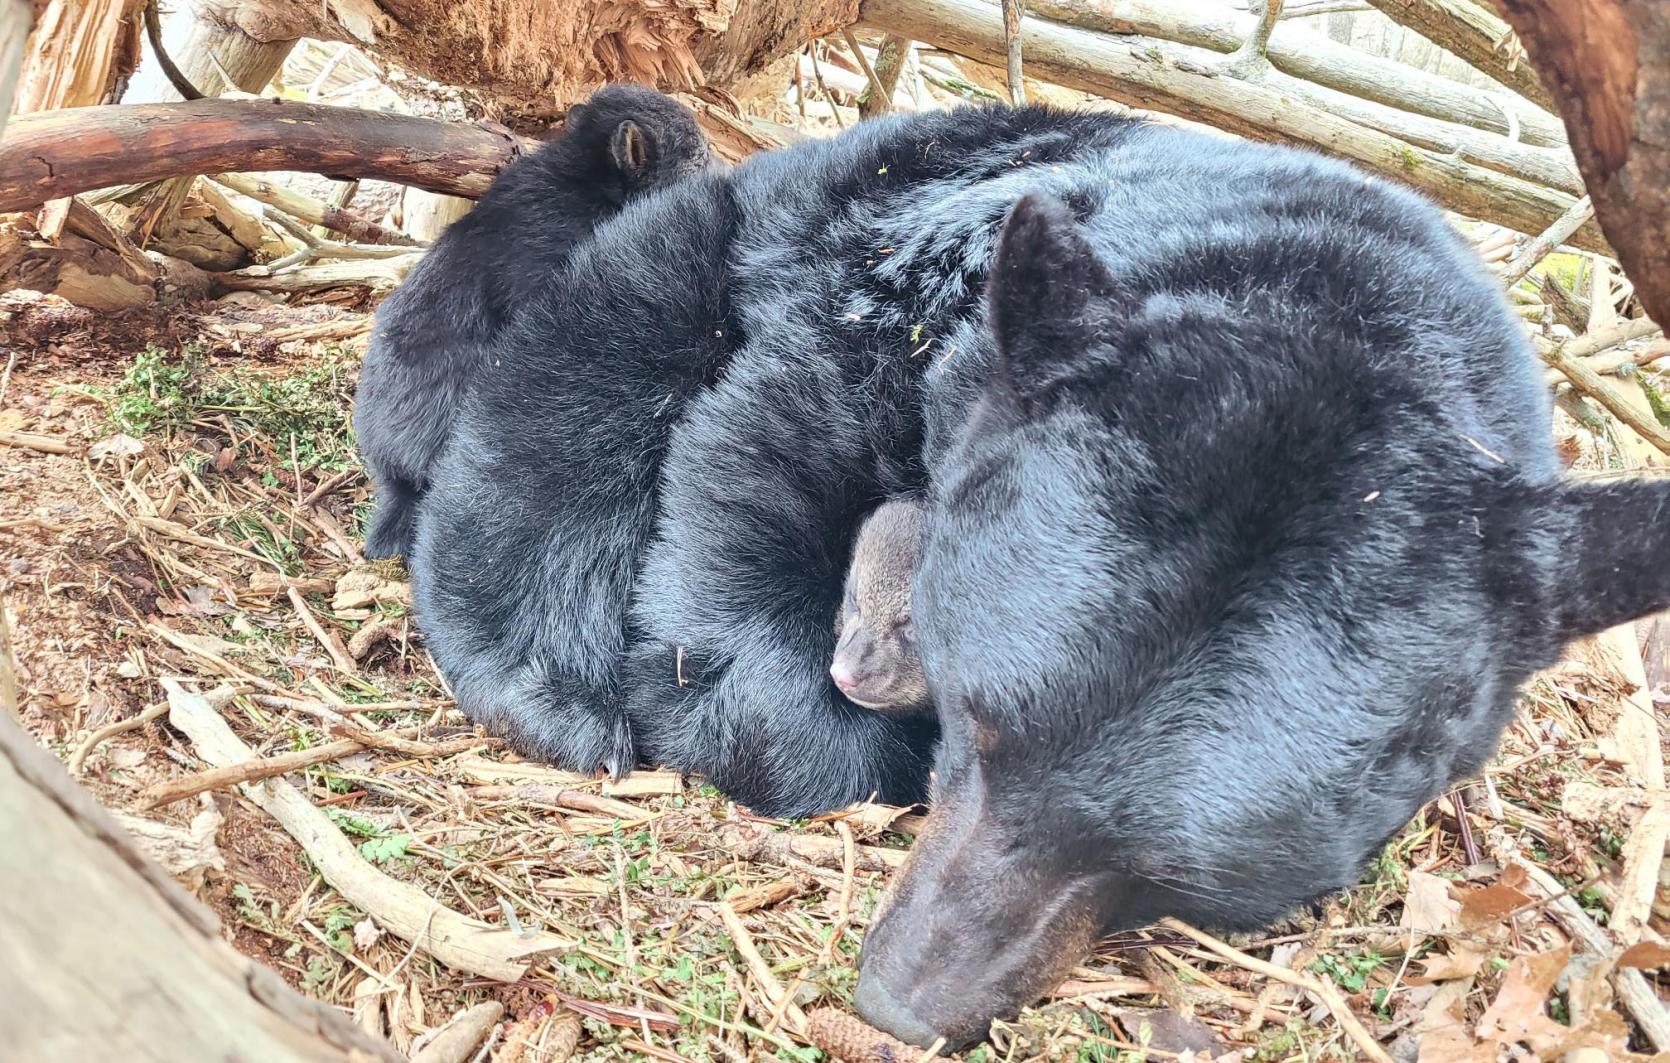 Black bear sow and her cubs in their winter den